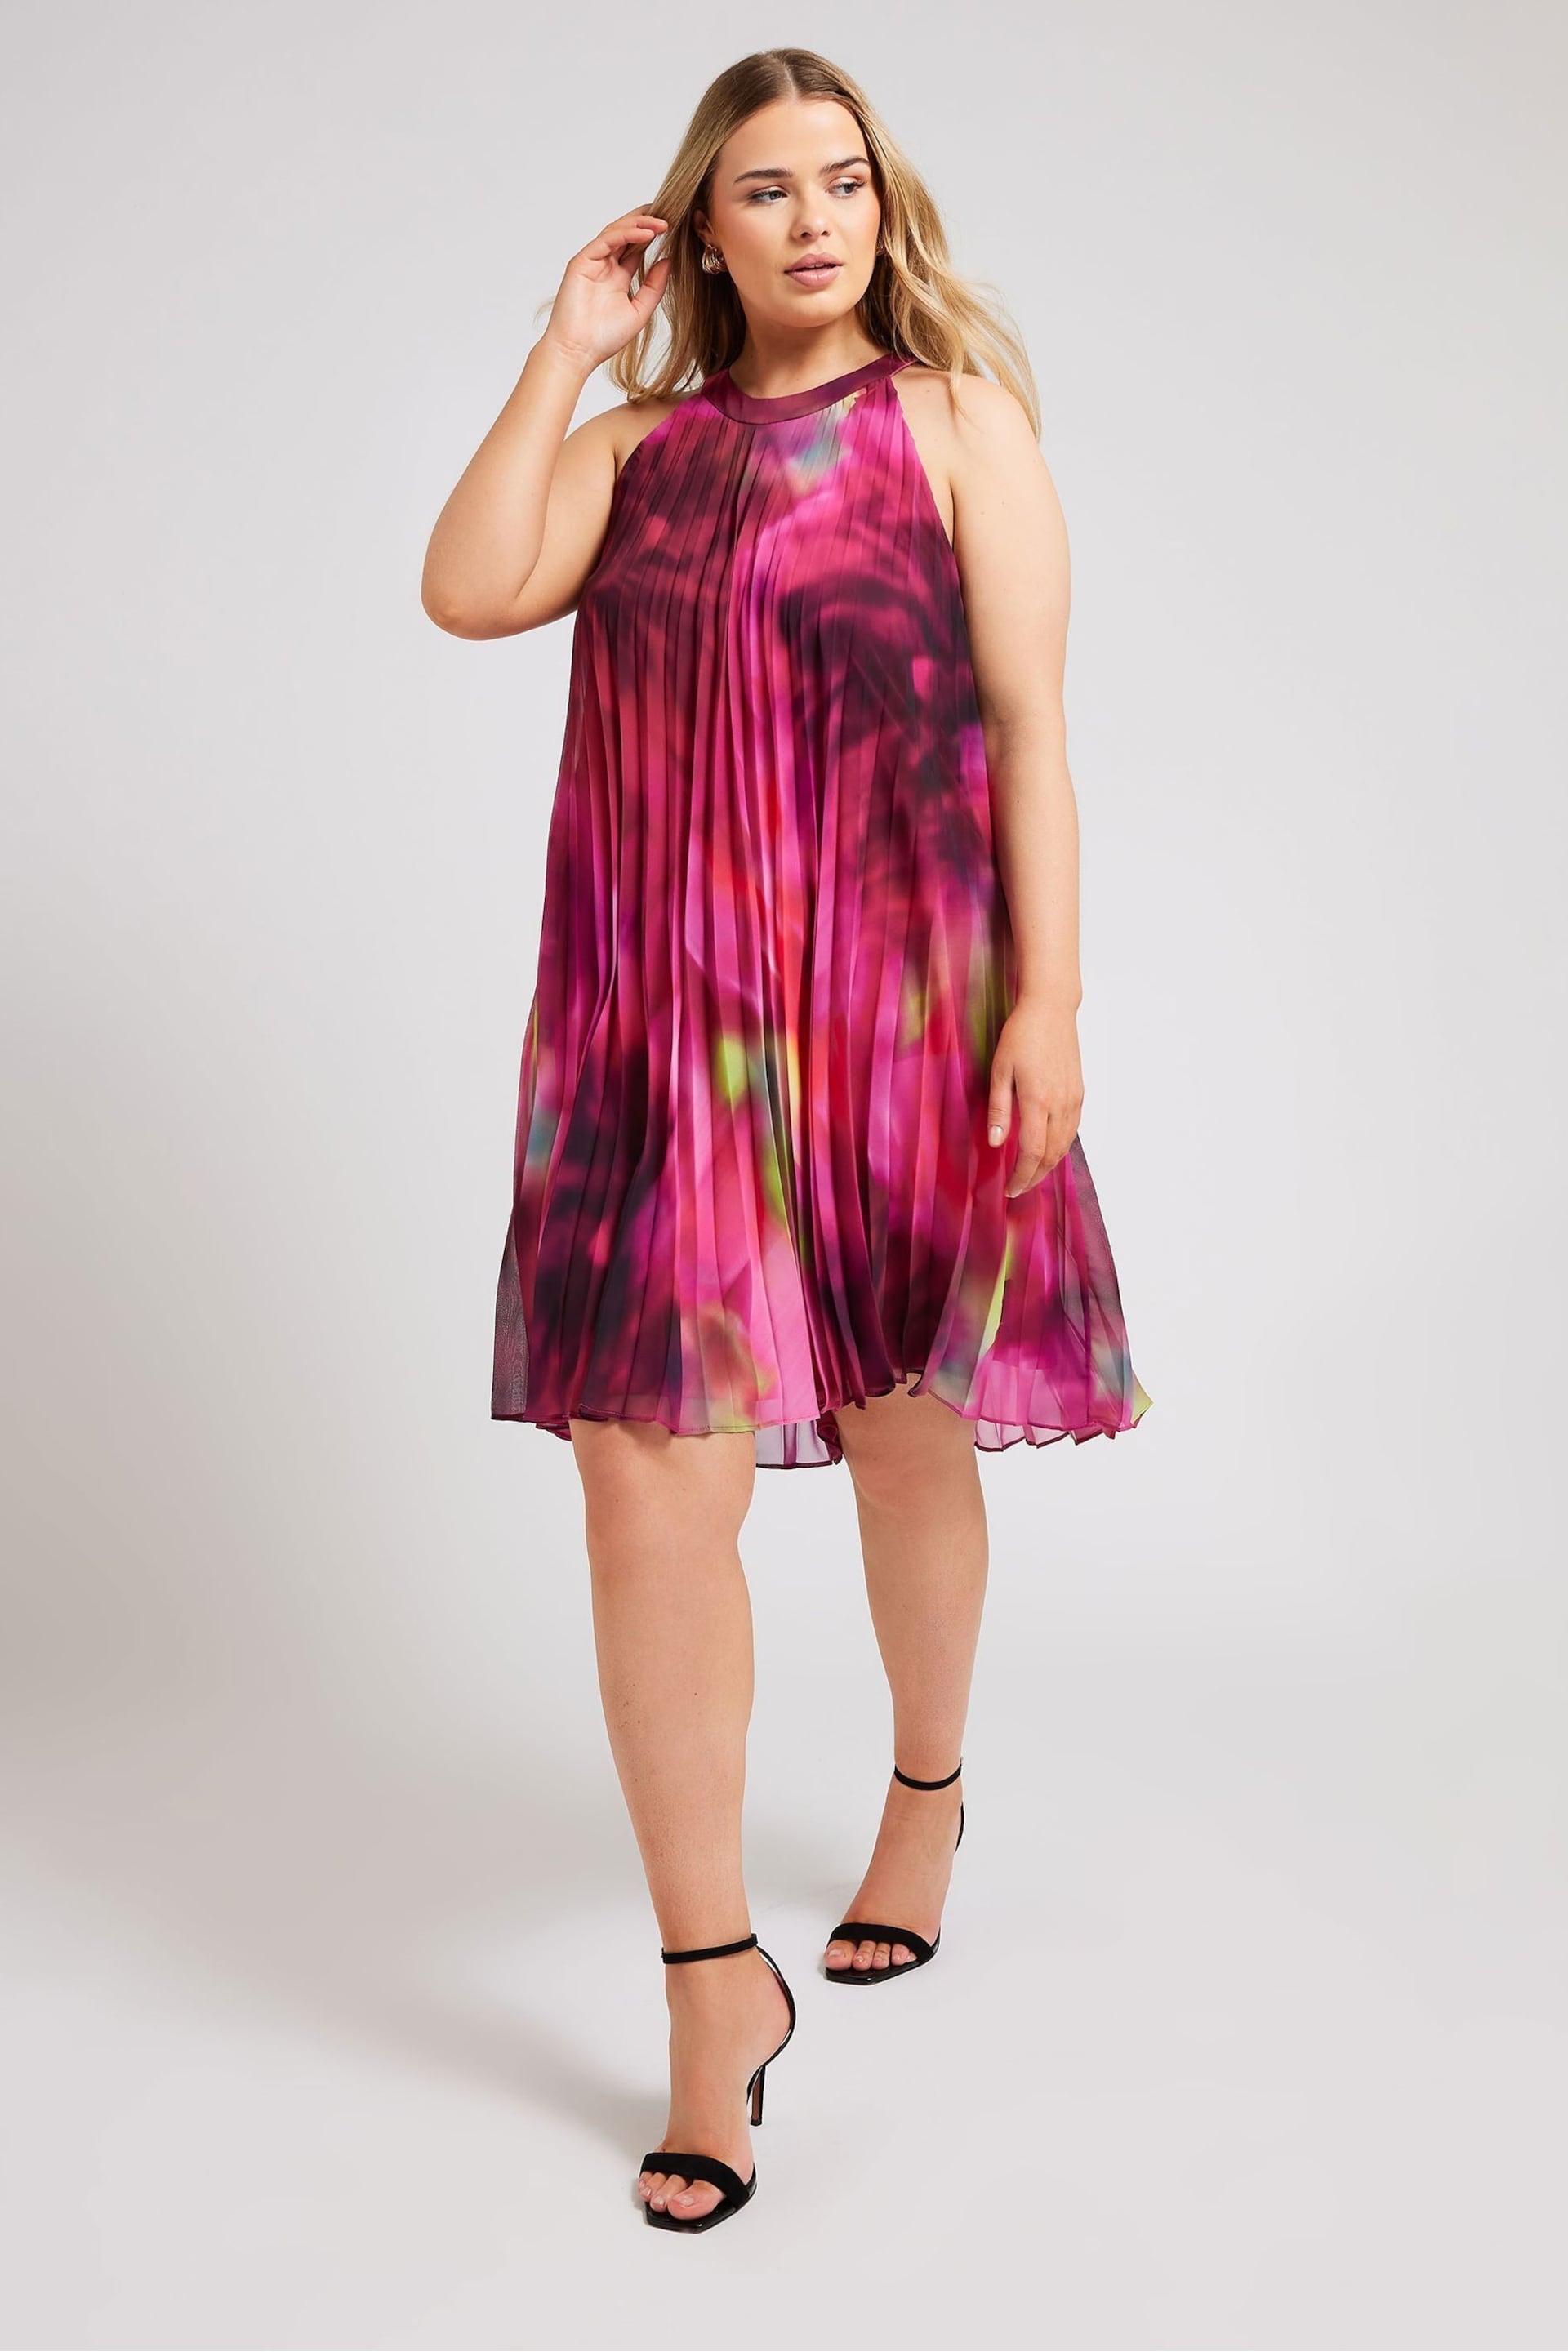 Yours Curve Pink Tropical Print Halter Neck Dress - Image 3 of 5